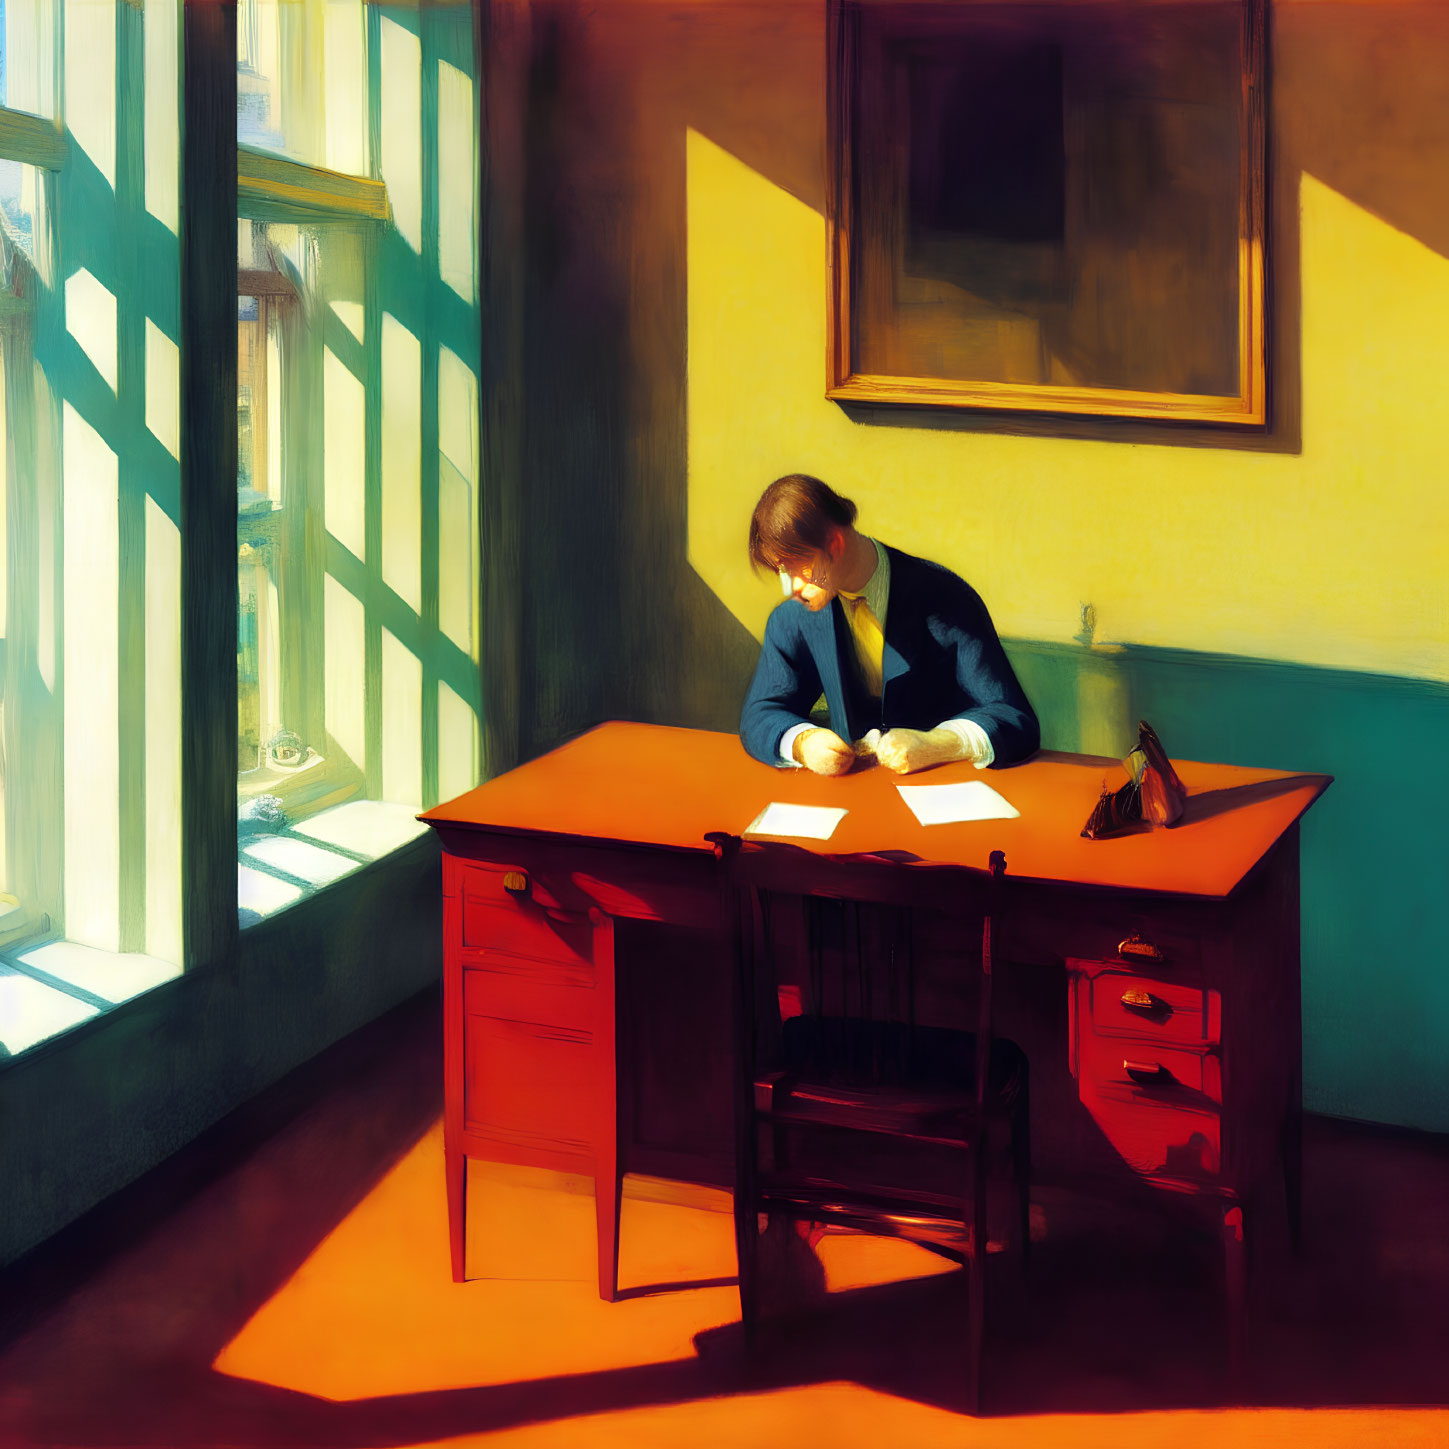 Person reading at red desk in sunlit room with shadows and painting on wall